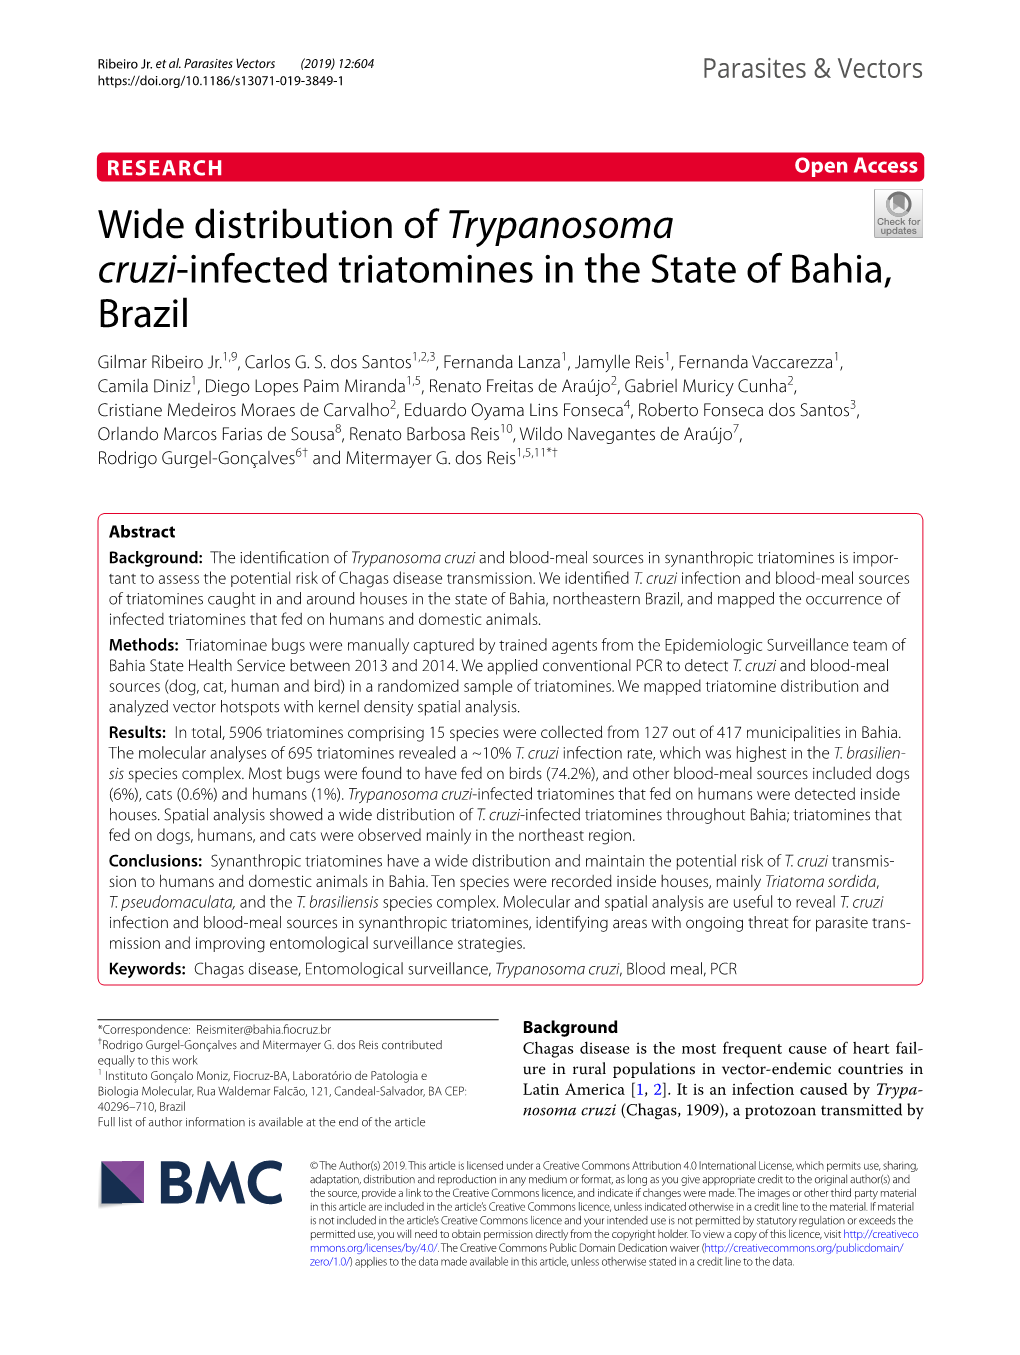 Wide Distribution of Trypanosoma Cruzi-Infected Triatomines in The